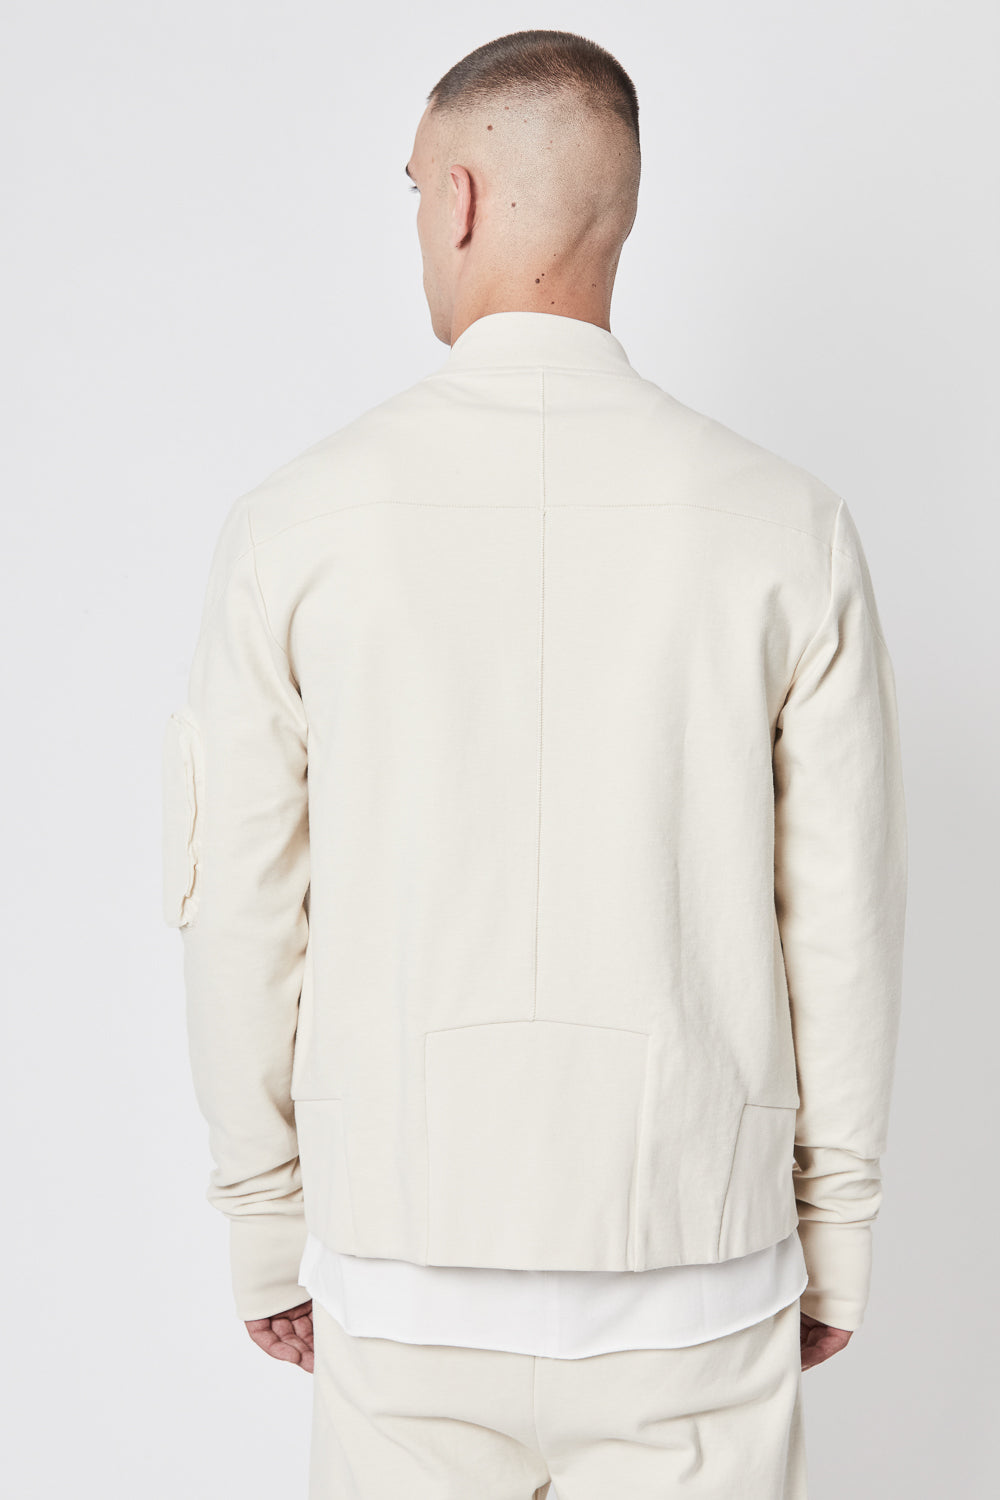 Buy the Thom Krom M SJ 588 Jacket in Ivory at Intro. Spend £50 for free UK delivery. Official stockists. We ship worldwide.